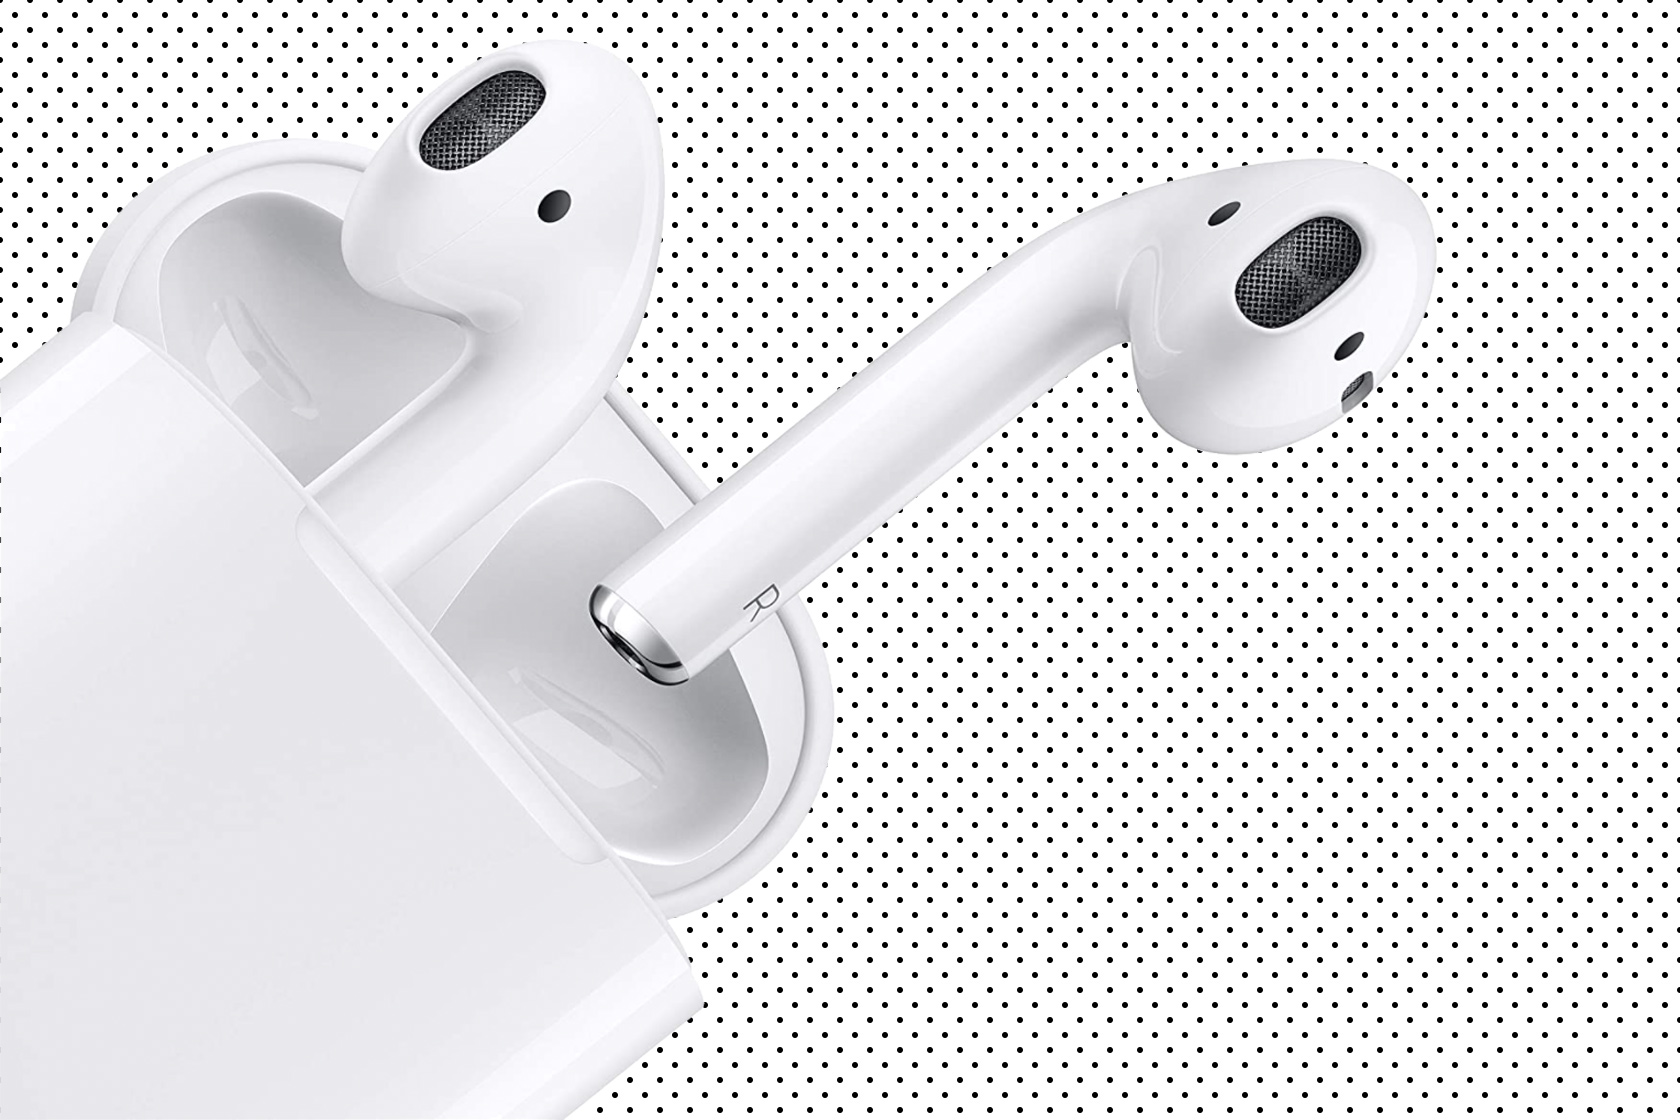 Cheap AirPods are still in stock at Amazon